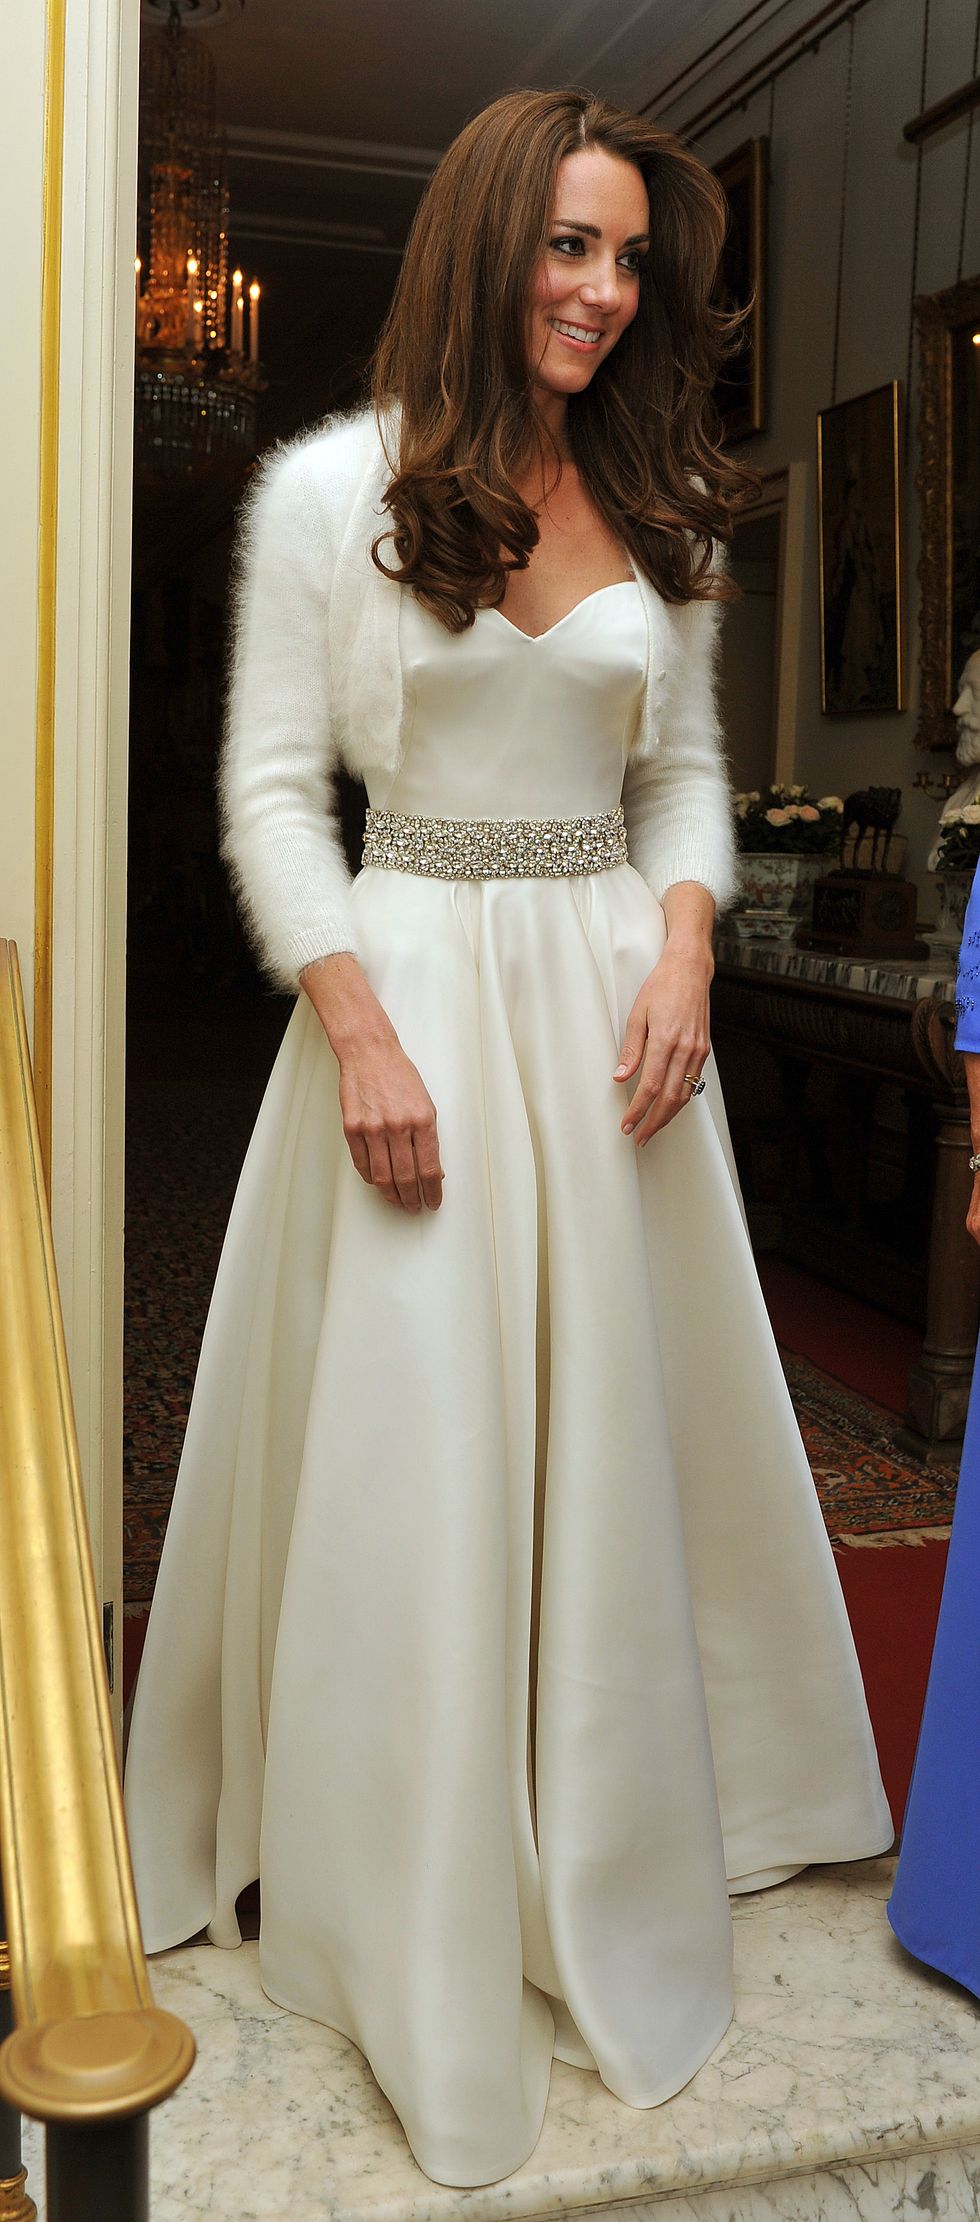 Kabelbane Messing Statistisk Just Some Gorgeous Pics of Kate Middleton's Second Wedding Dress